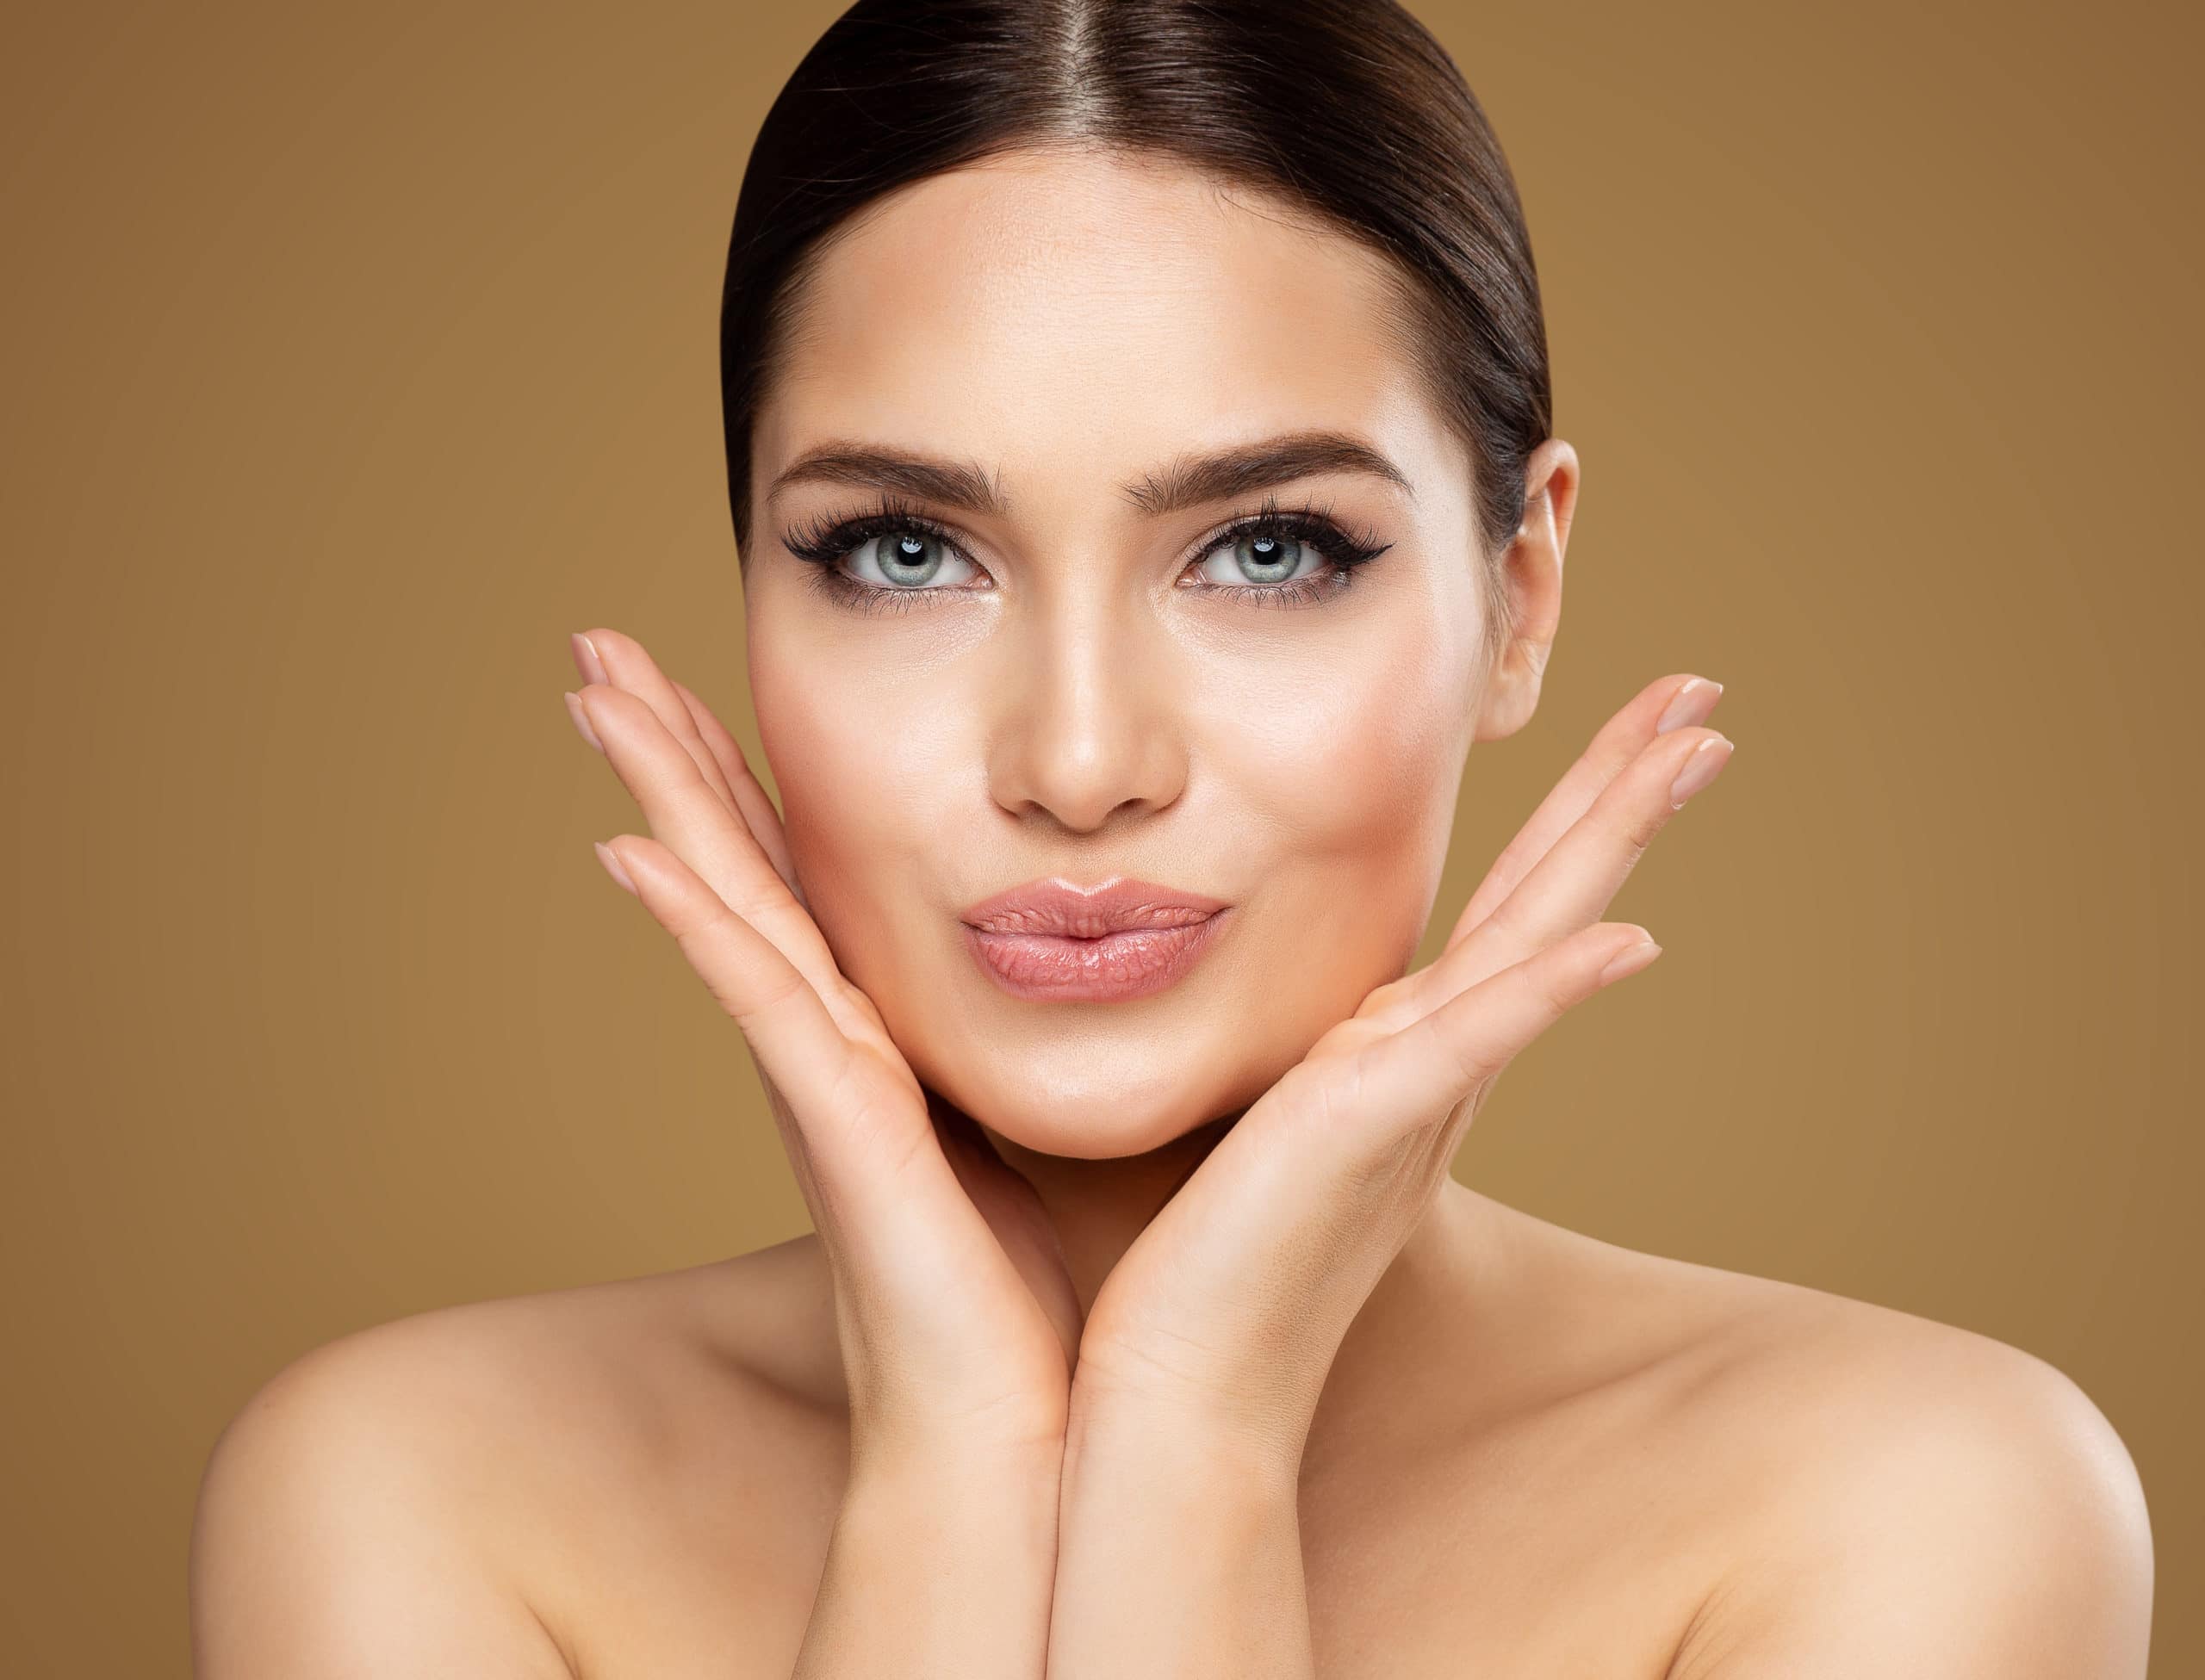 Beauty Model showing Cheekbones and Full Lips. Beautiful Woman Face Skin Care. Women Dermal Filler and Permanent Make up Cosmetology. Lip Augmentation Facial Lifting Spa Massage | Adam J Cohen, MD in Glenview & Chicago, IL